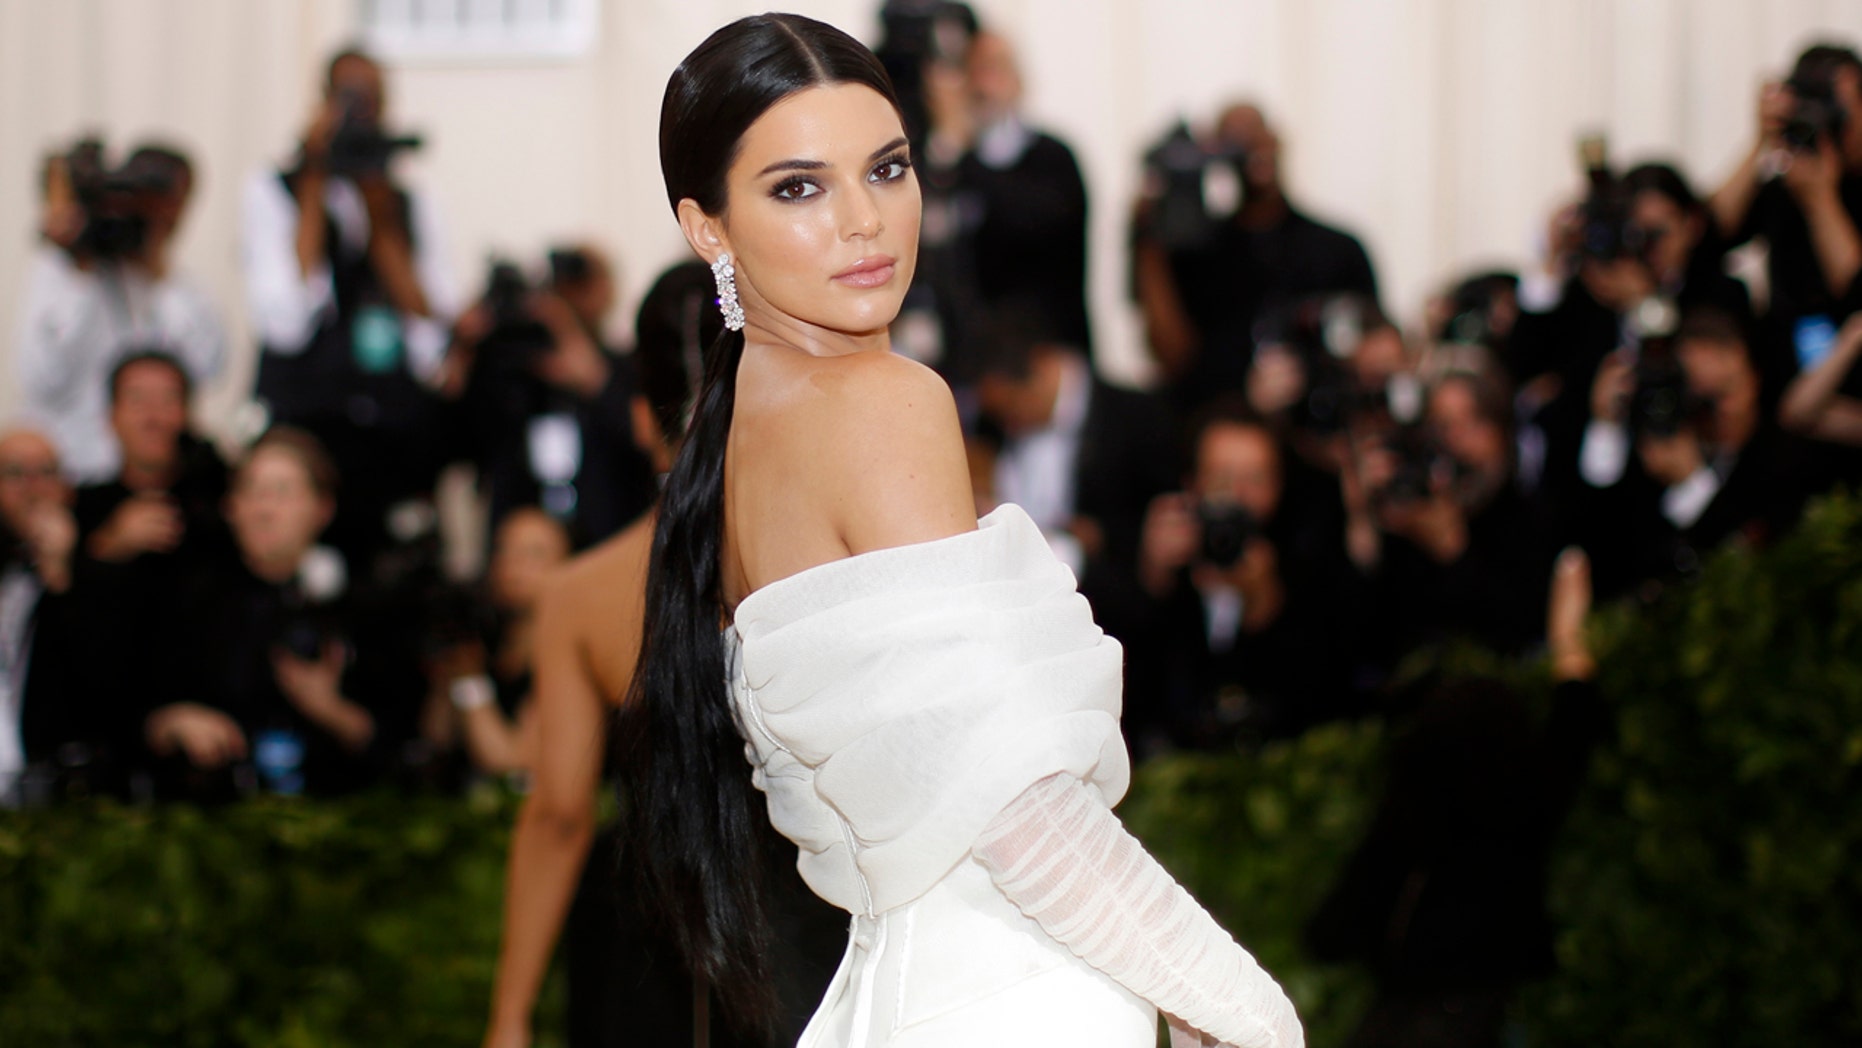 Kendall Jenner Pushes Security Guard In Viral Met Gala Video